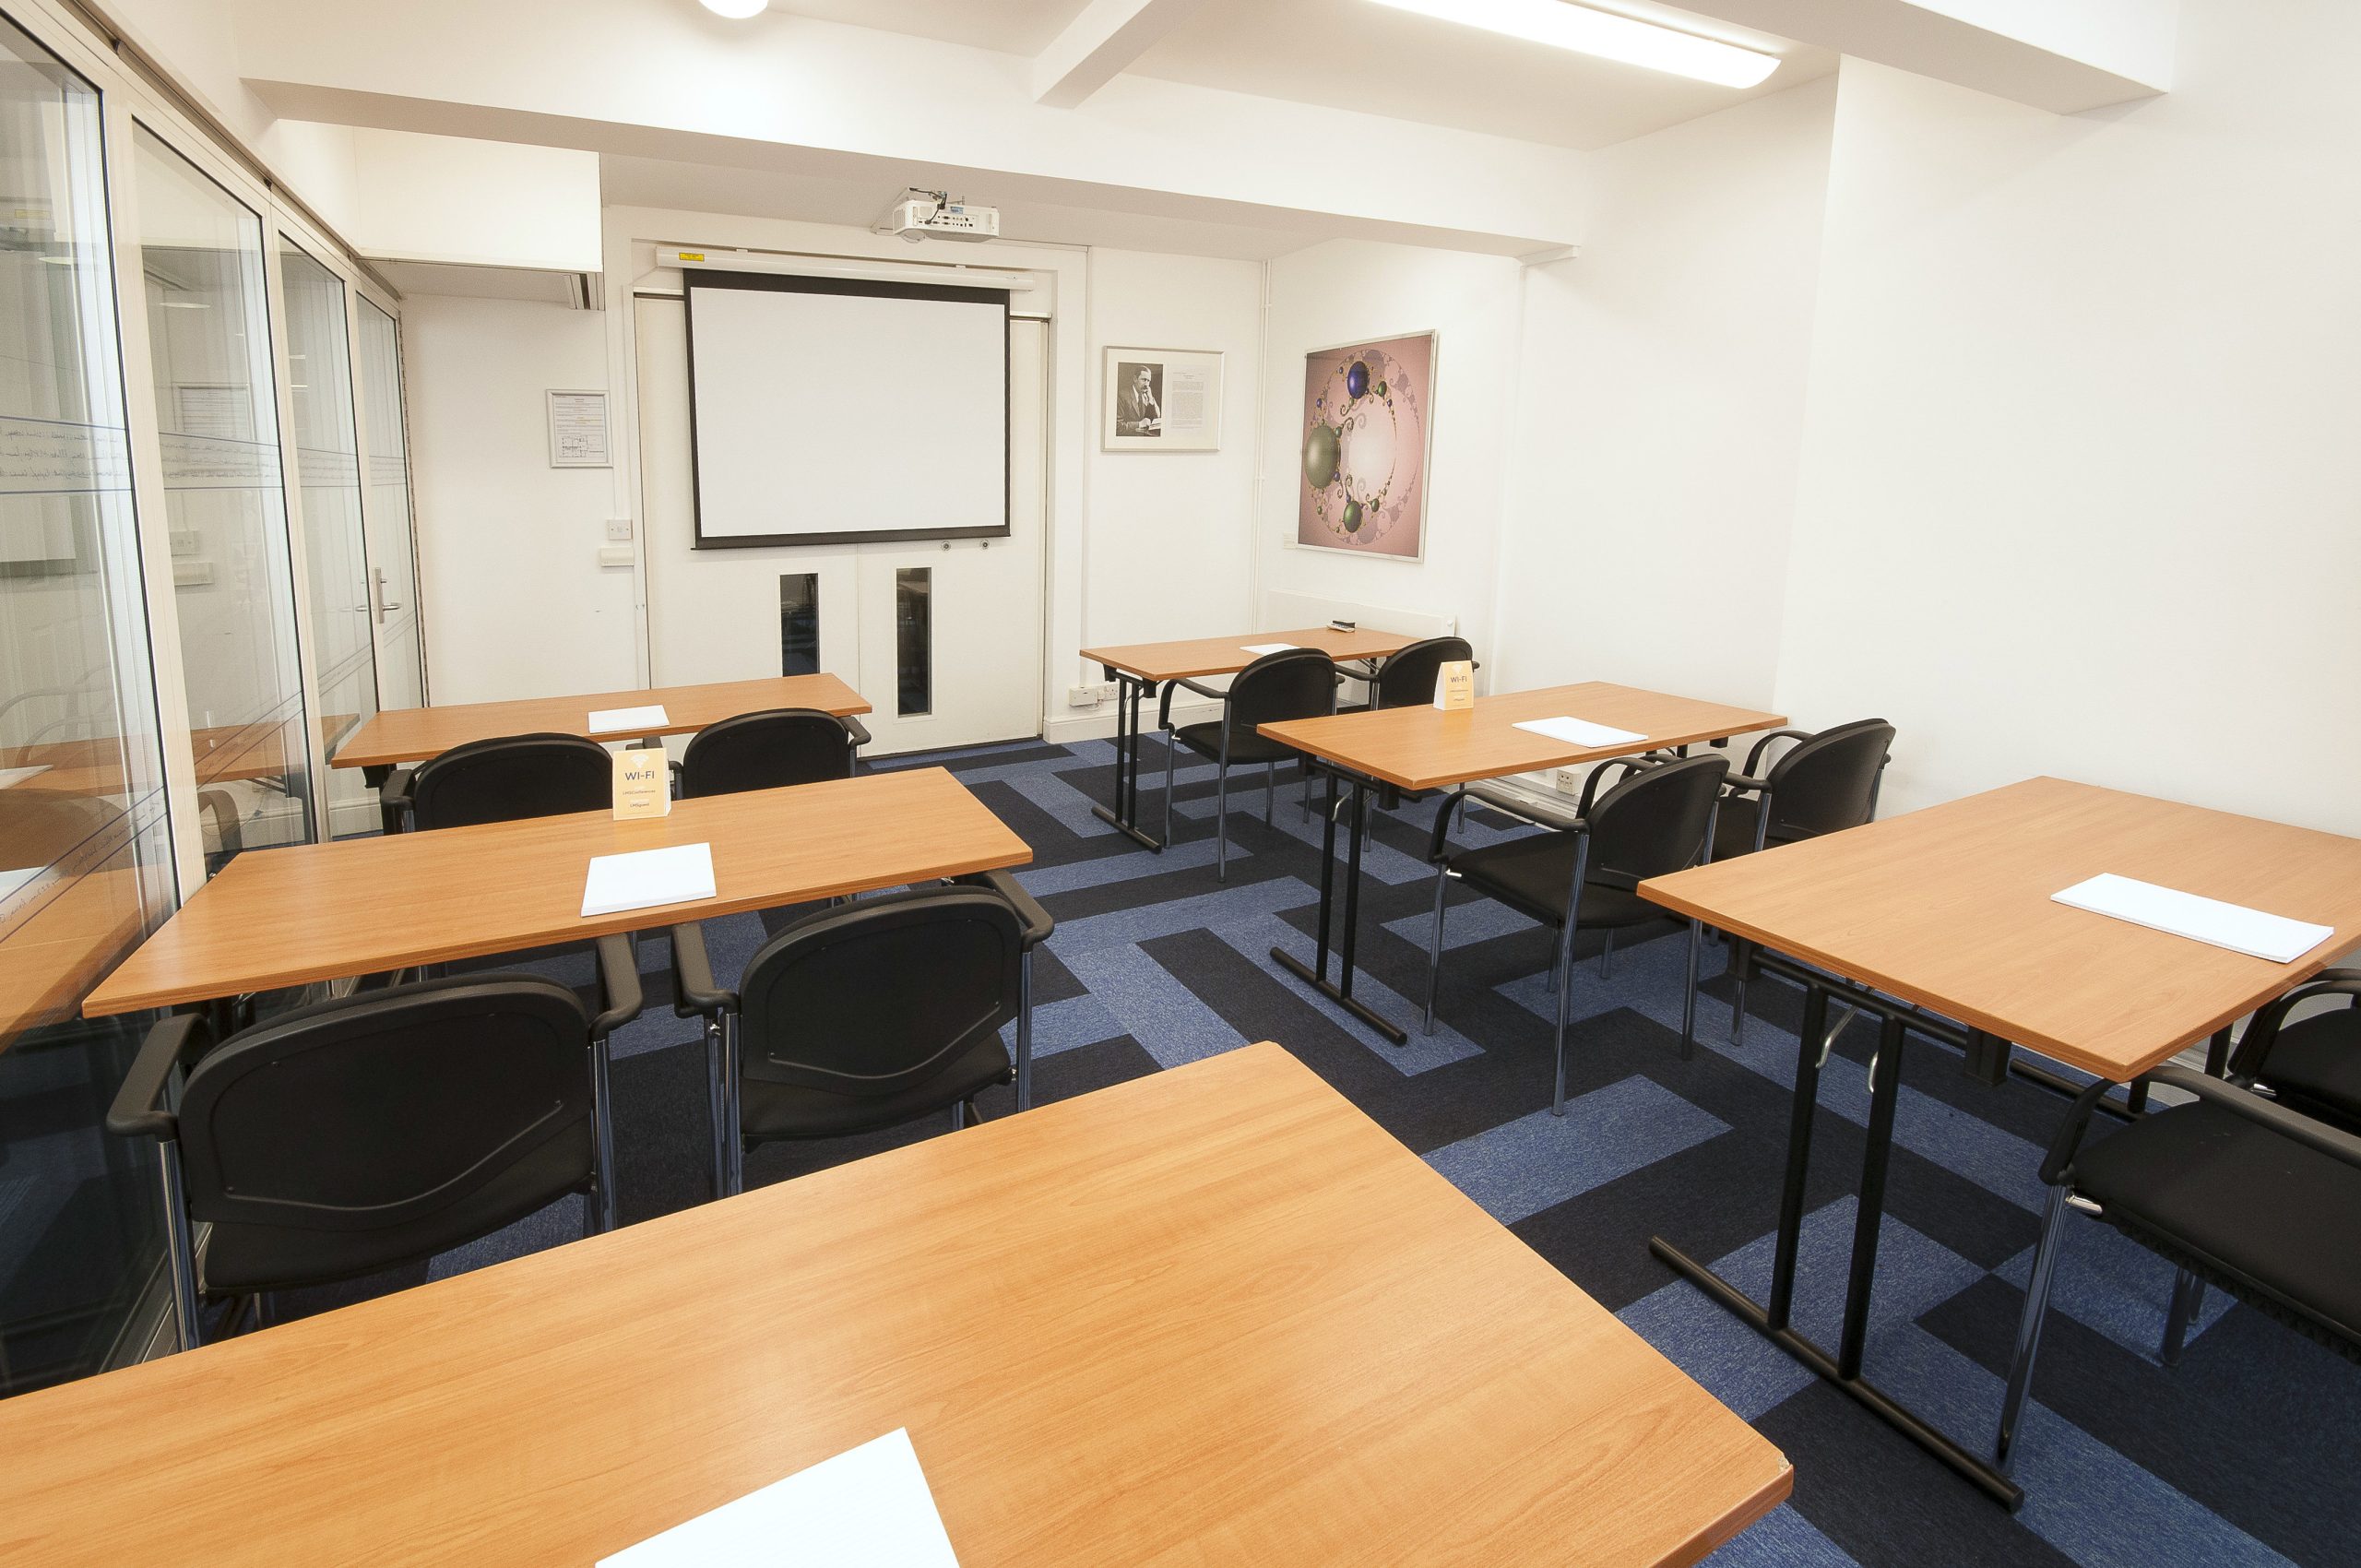 Photo of a medium sized meeting room in a classroom style